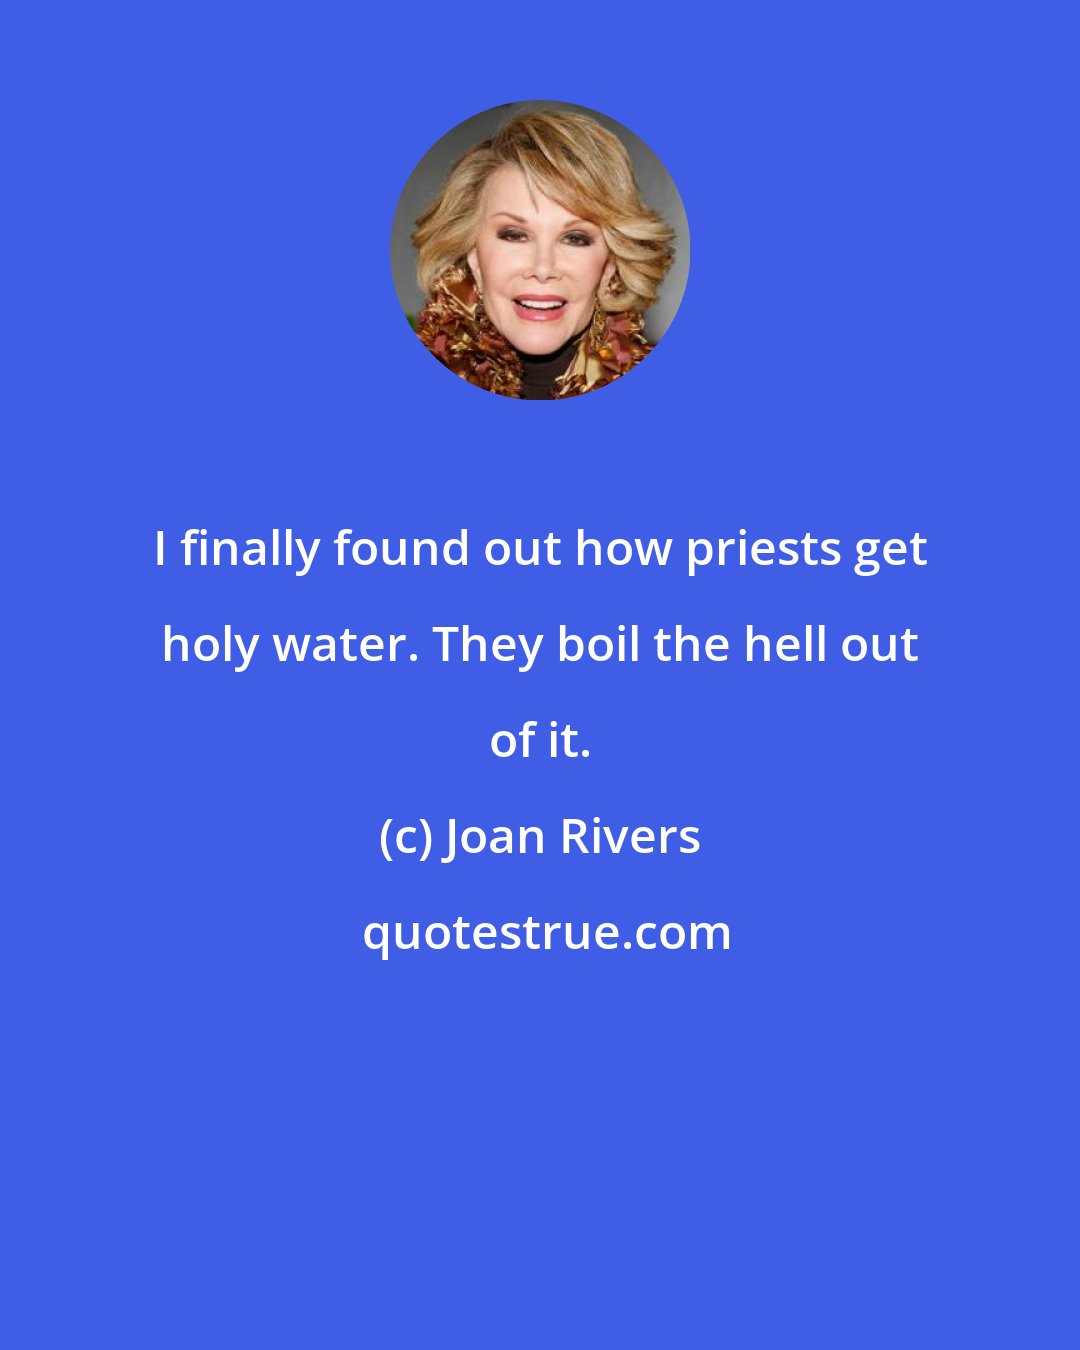 Joan Rivers: I finally found out how priests get holy water. They boil the hell out of it.